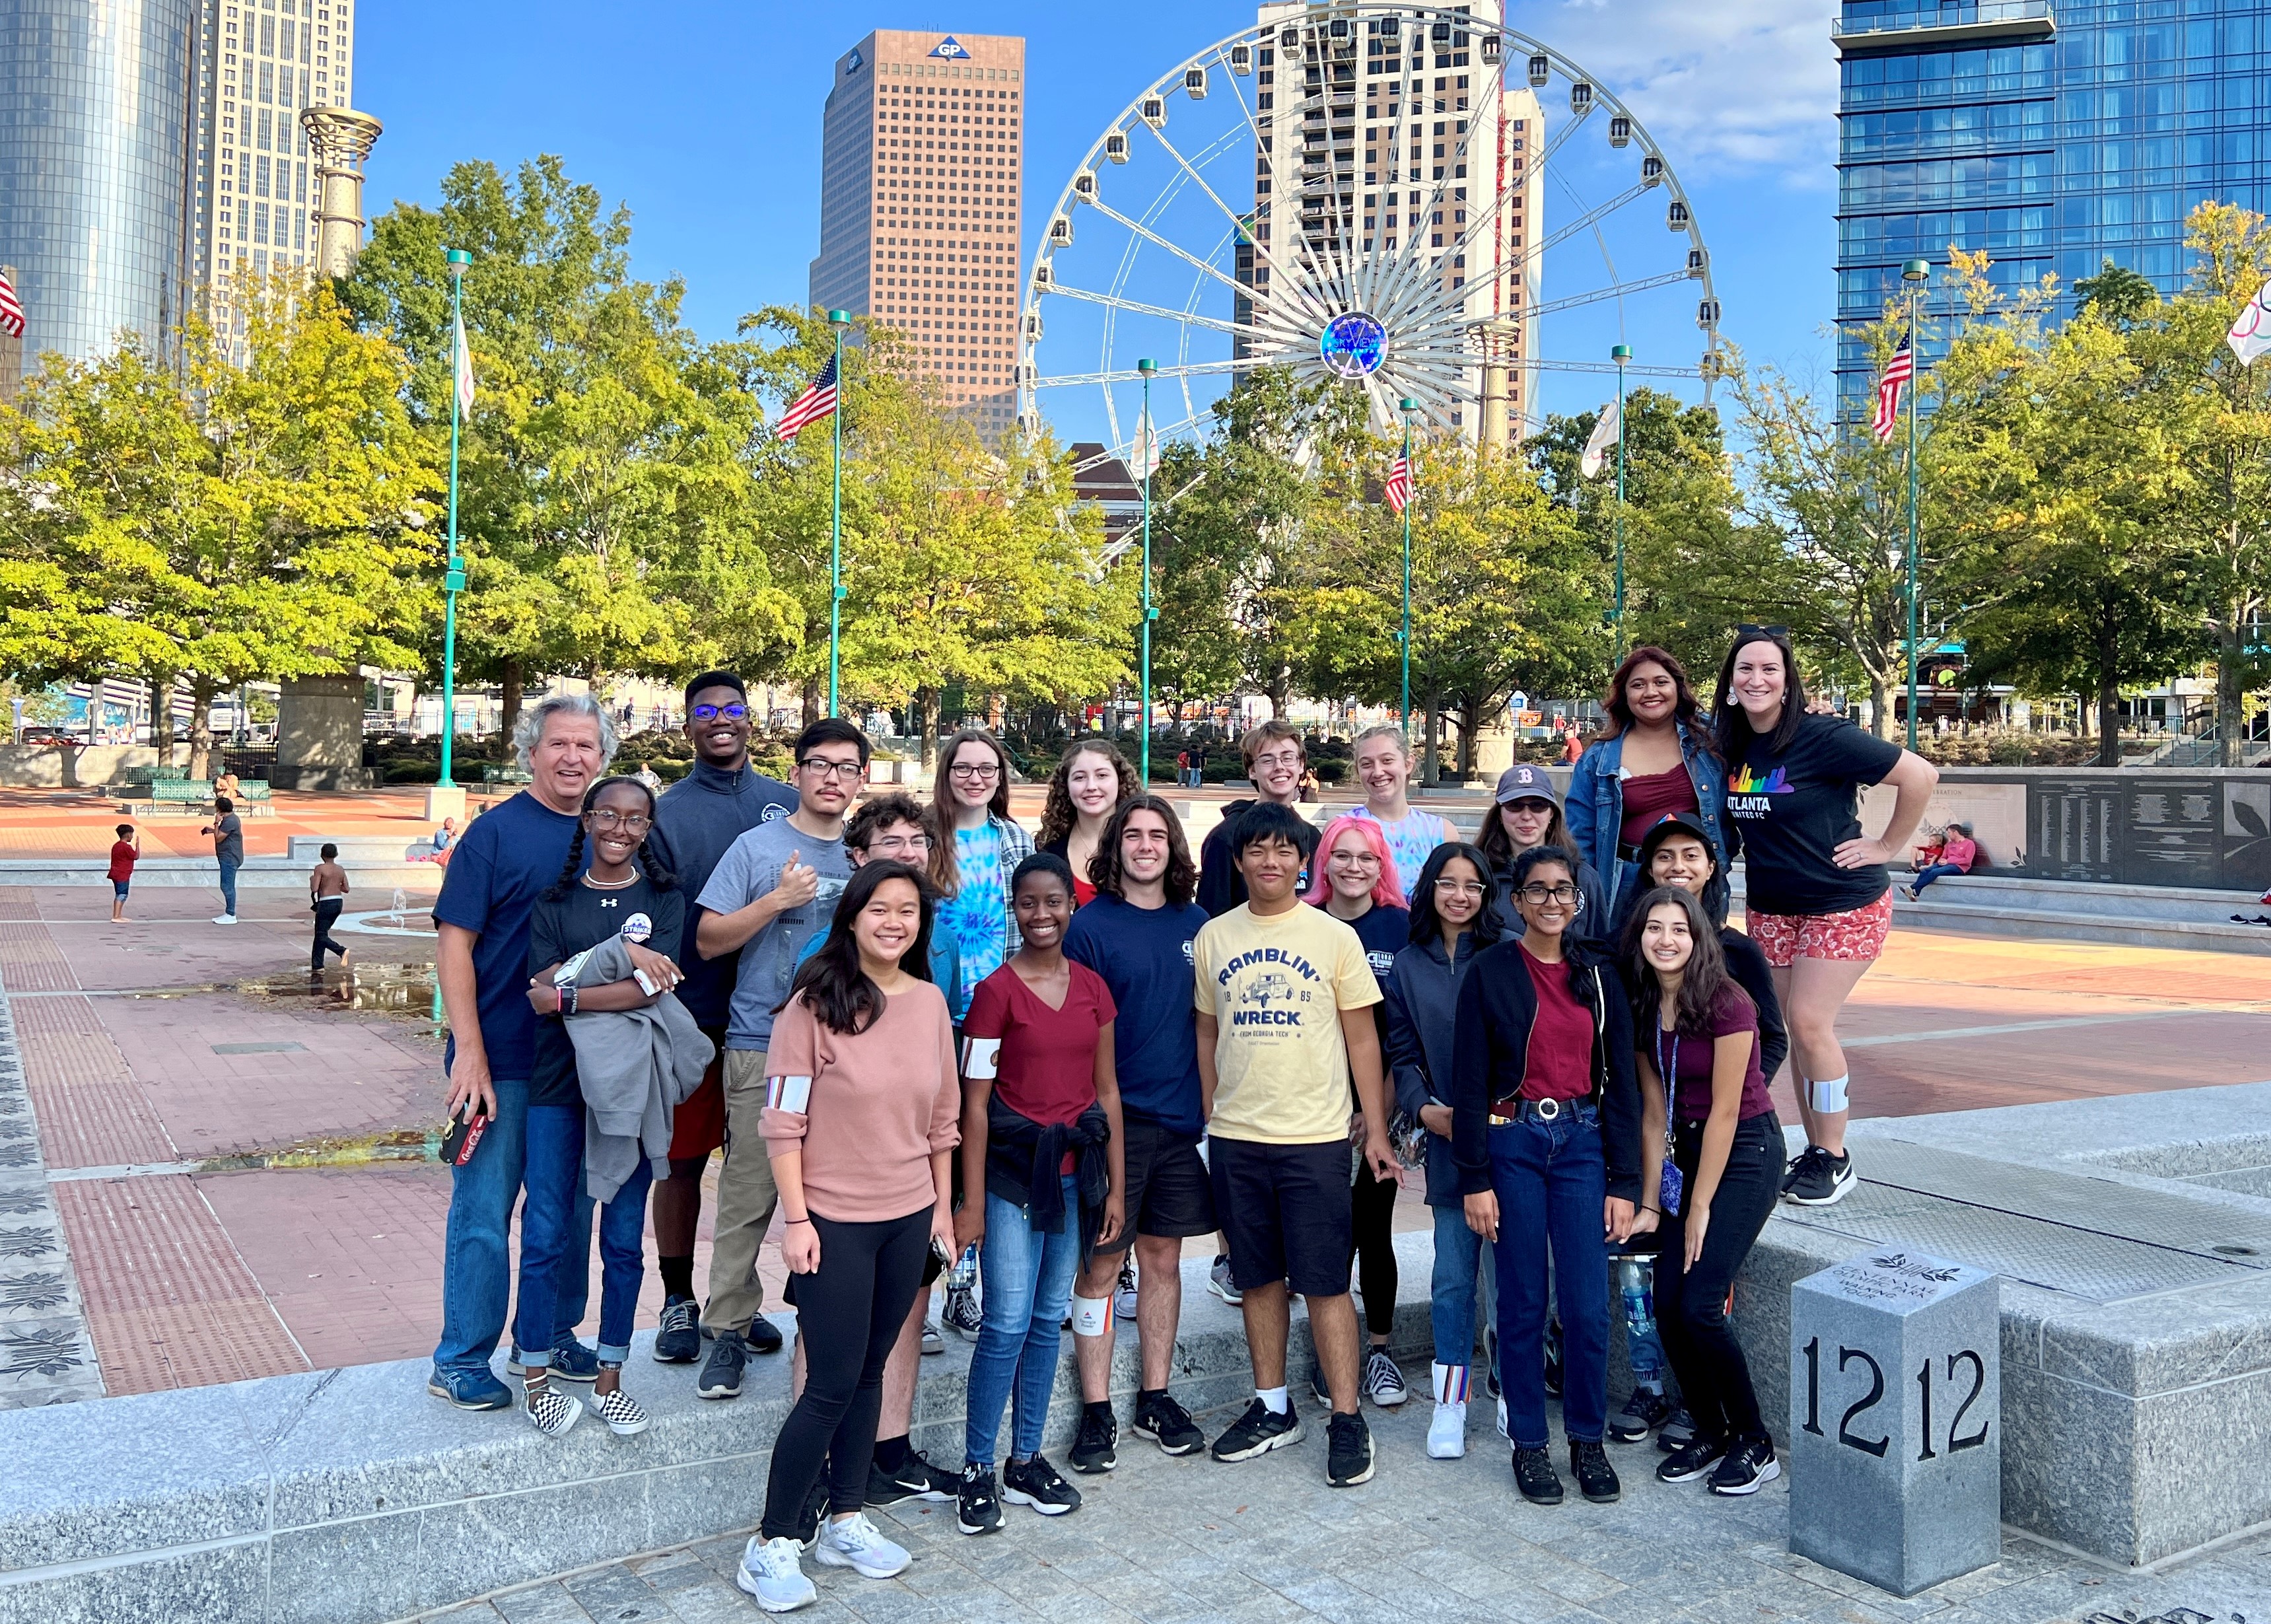 group of college students in front of giant ferris wheel on a sunny day